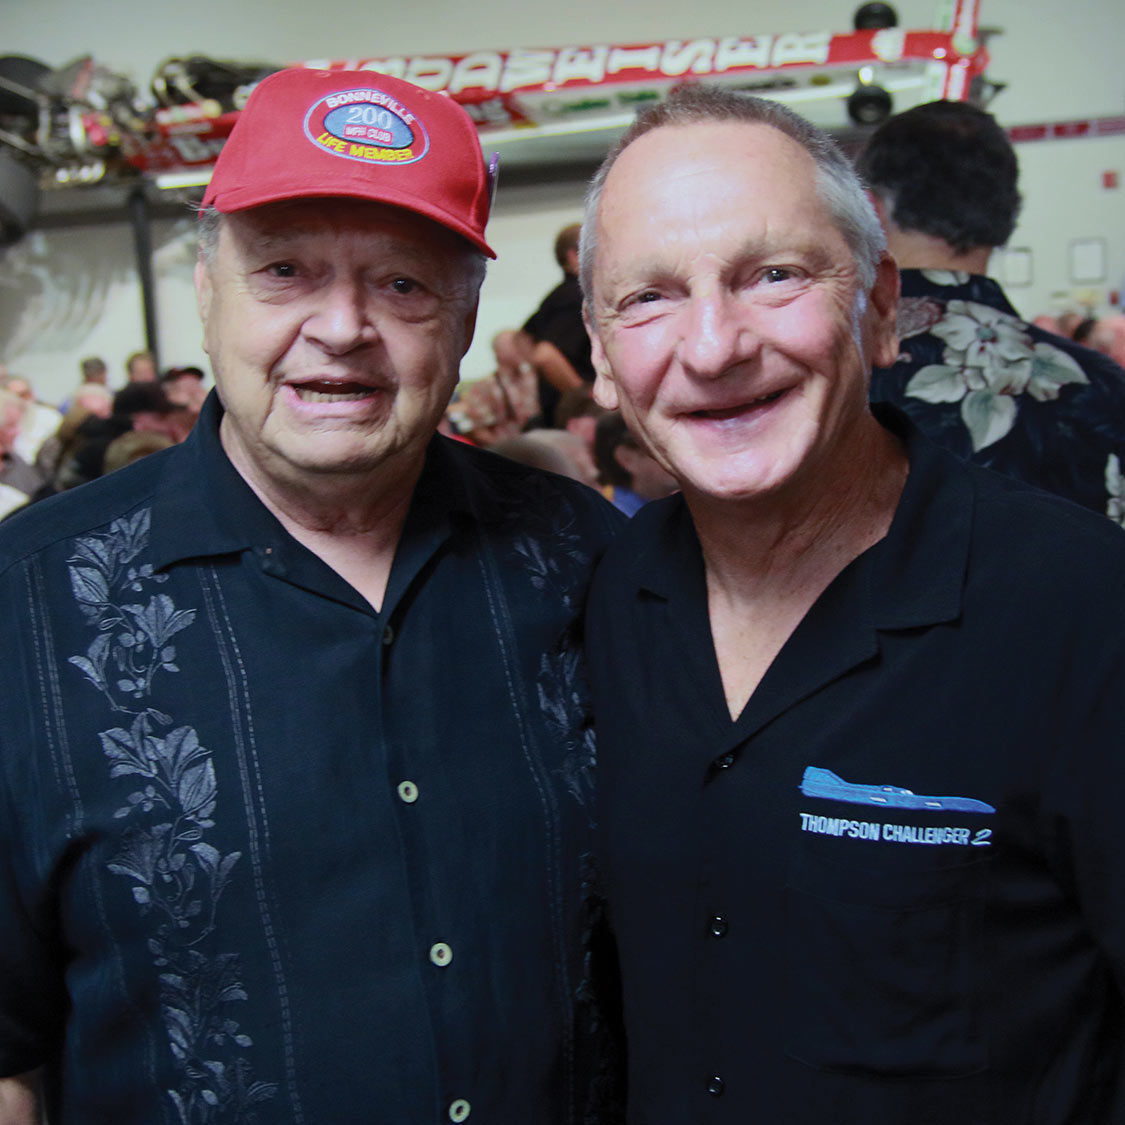 Jerry Kugel (L) and Danny Thompson